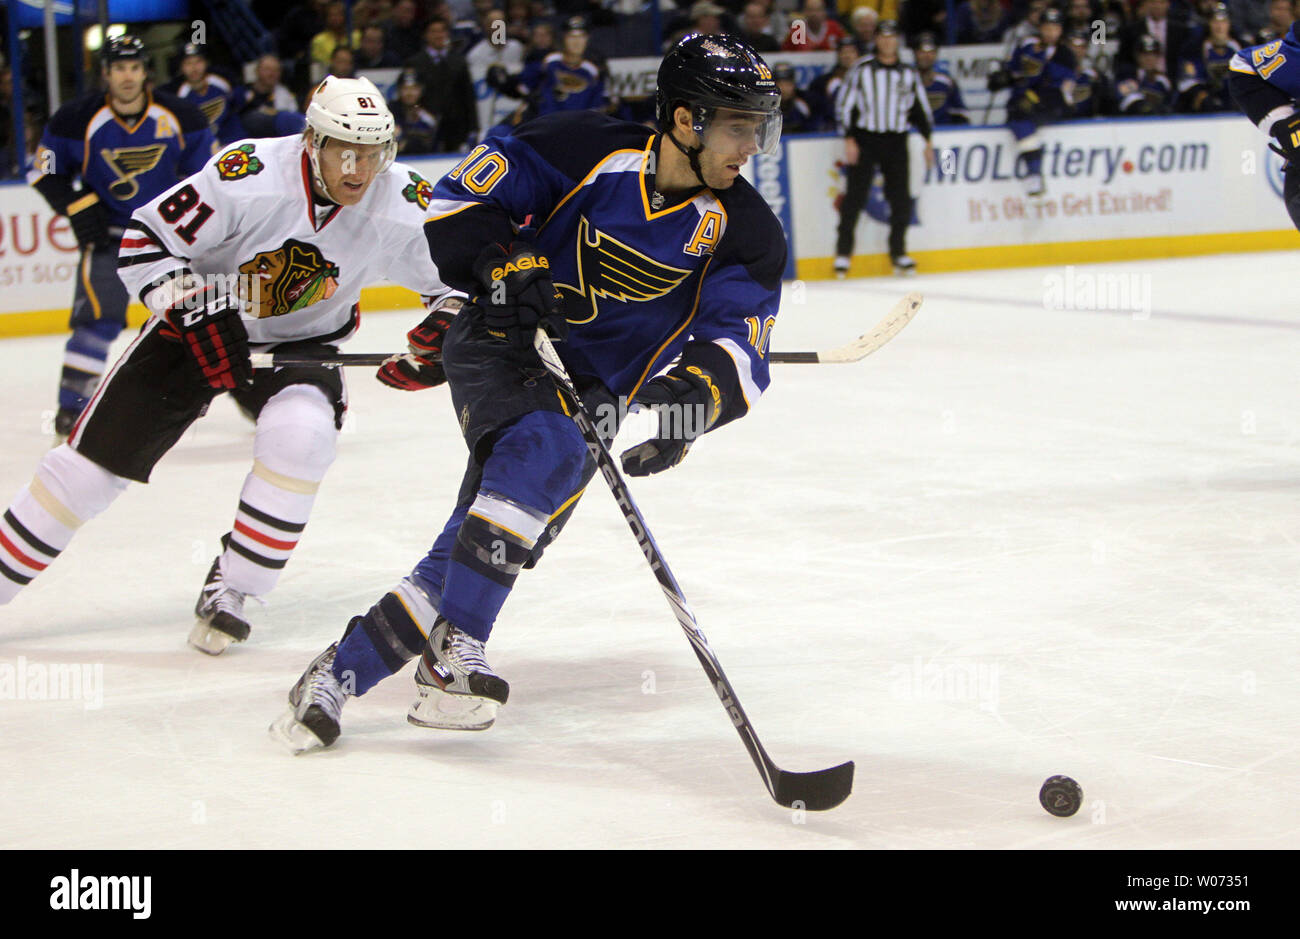 Chicago Blackhawks Marian Hossa (81) stays on the tail of St. Louis Blues Andy McDonald in the first period at the Scottrade Center in St. Louis on March 6, 2012.   UPI/Bill Greenblatt Stock Photo